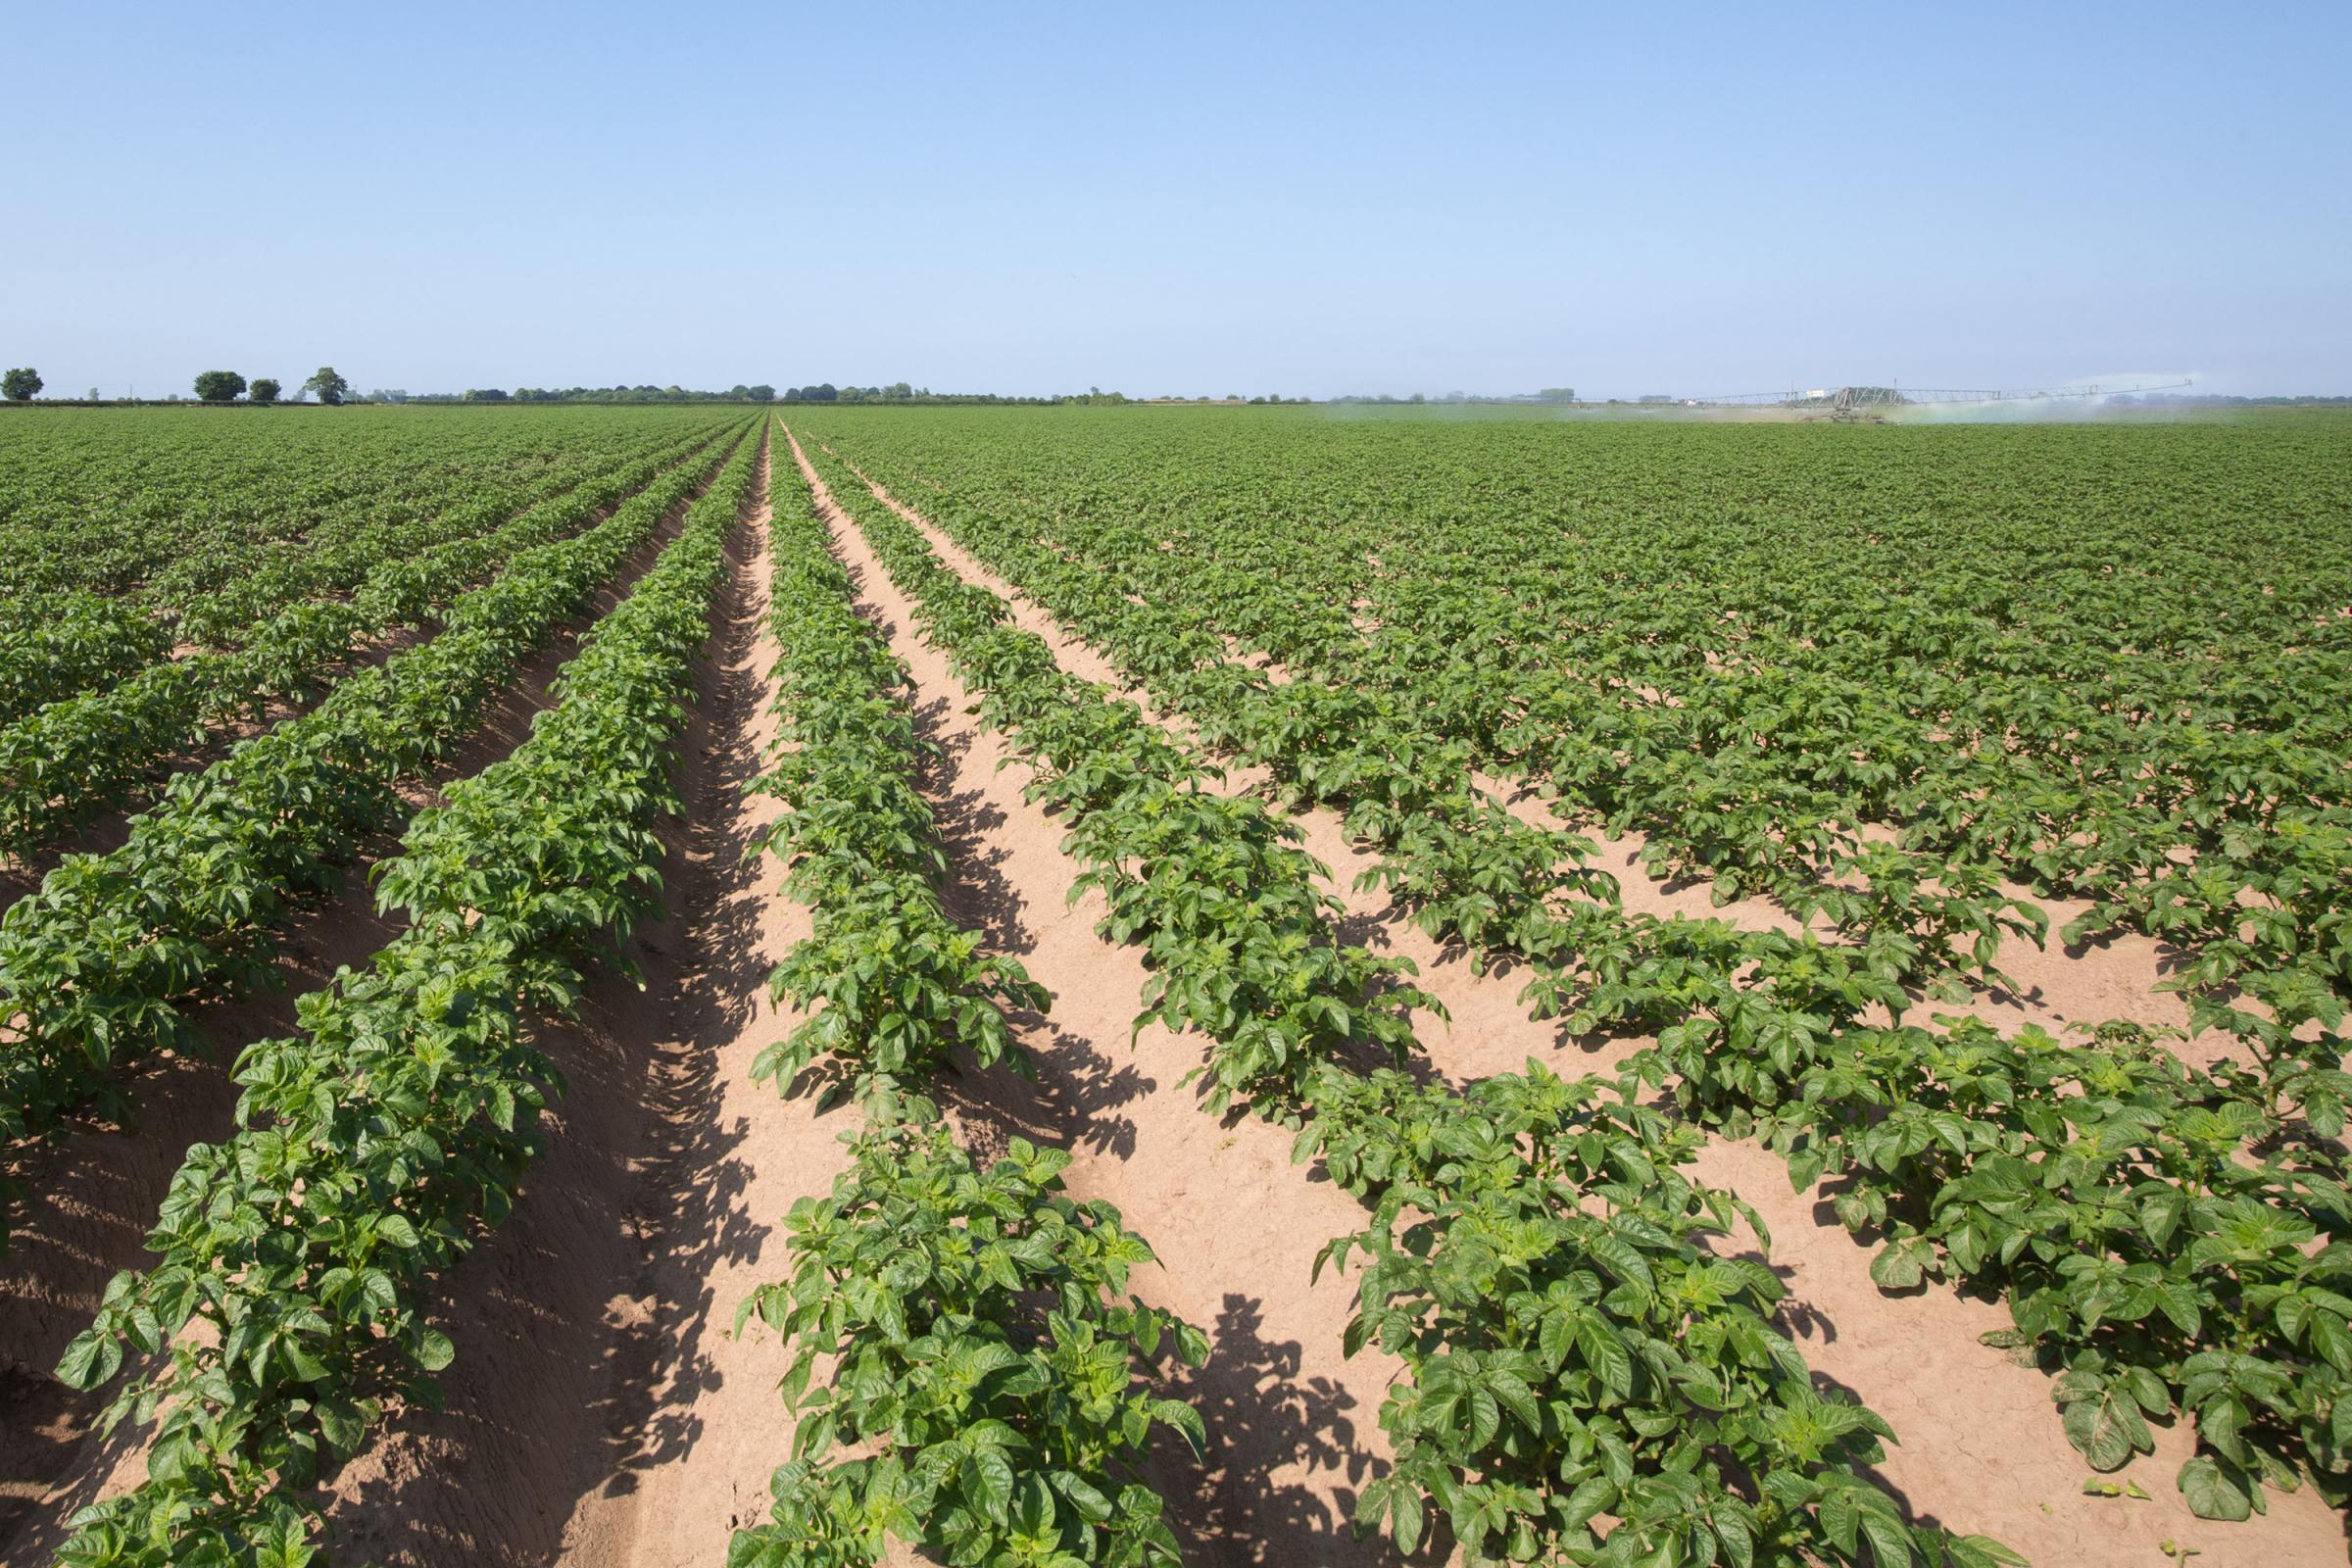 Potatoes were under heat stress for quite long periods in 2020